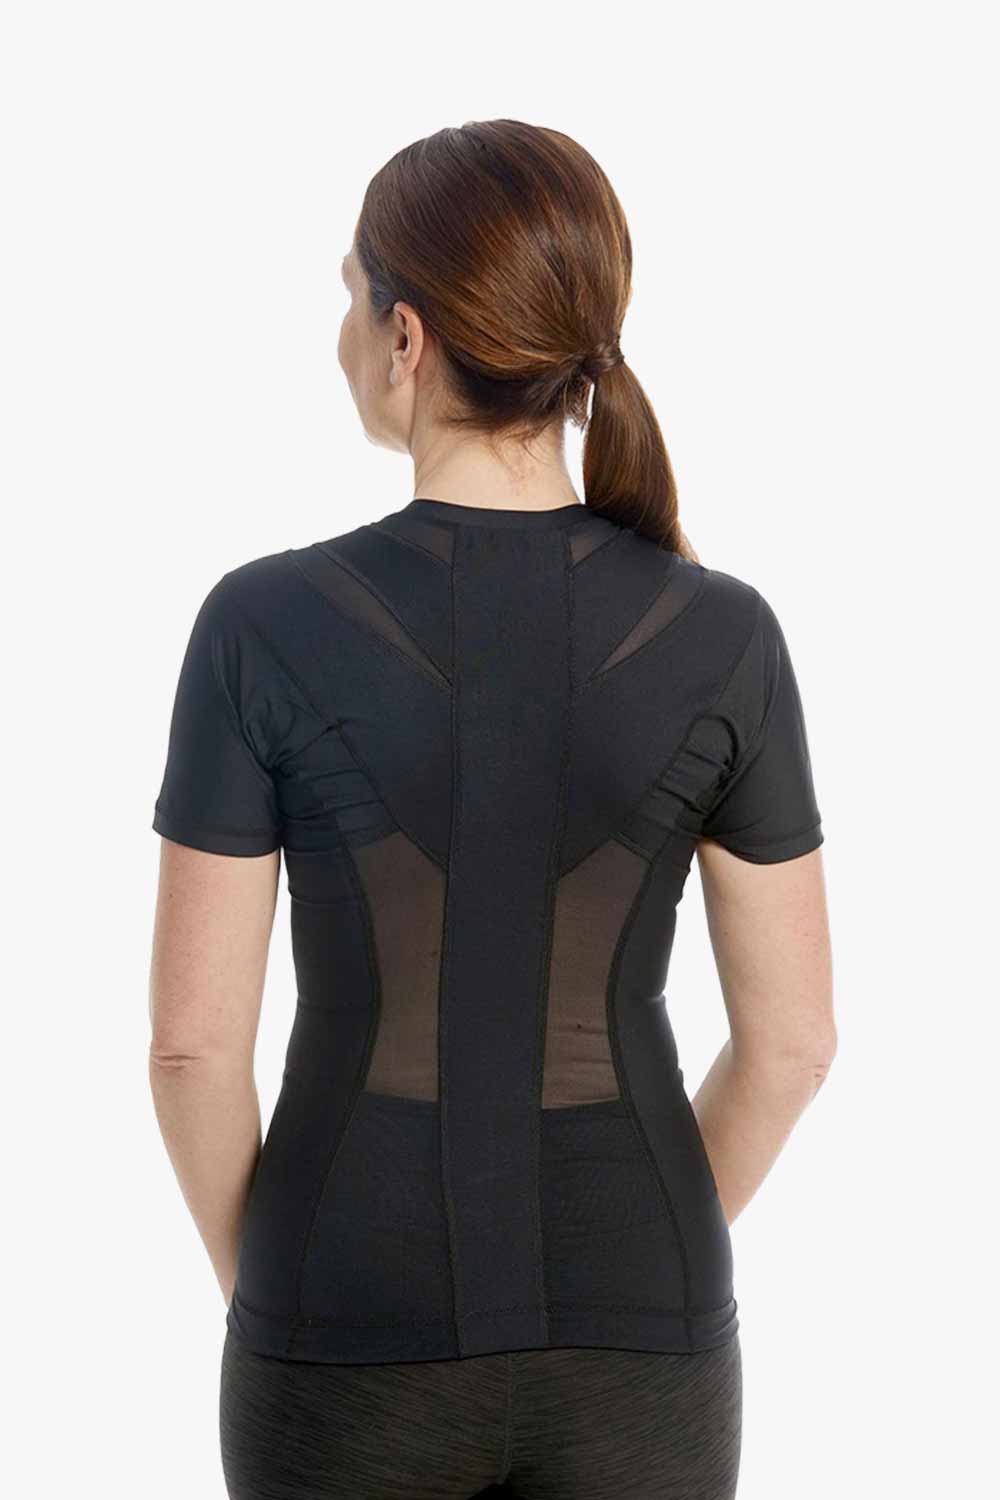 Review of Posture Shirt 2.0 by Active Posture Plus Discount Code –  Chronically Jenni